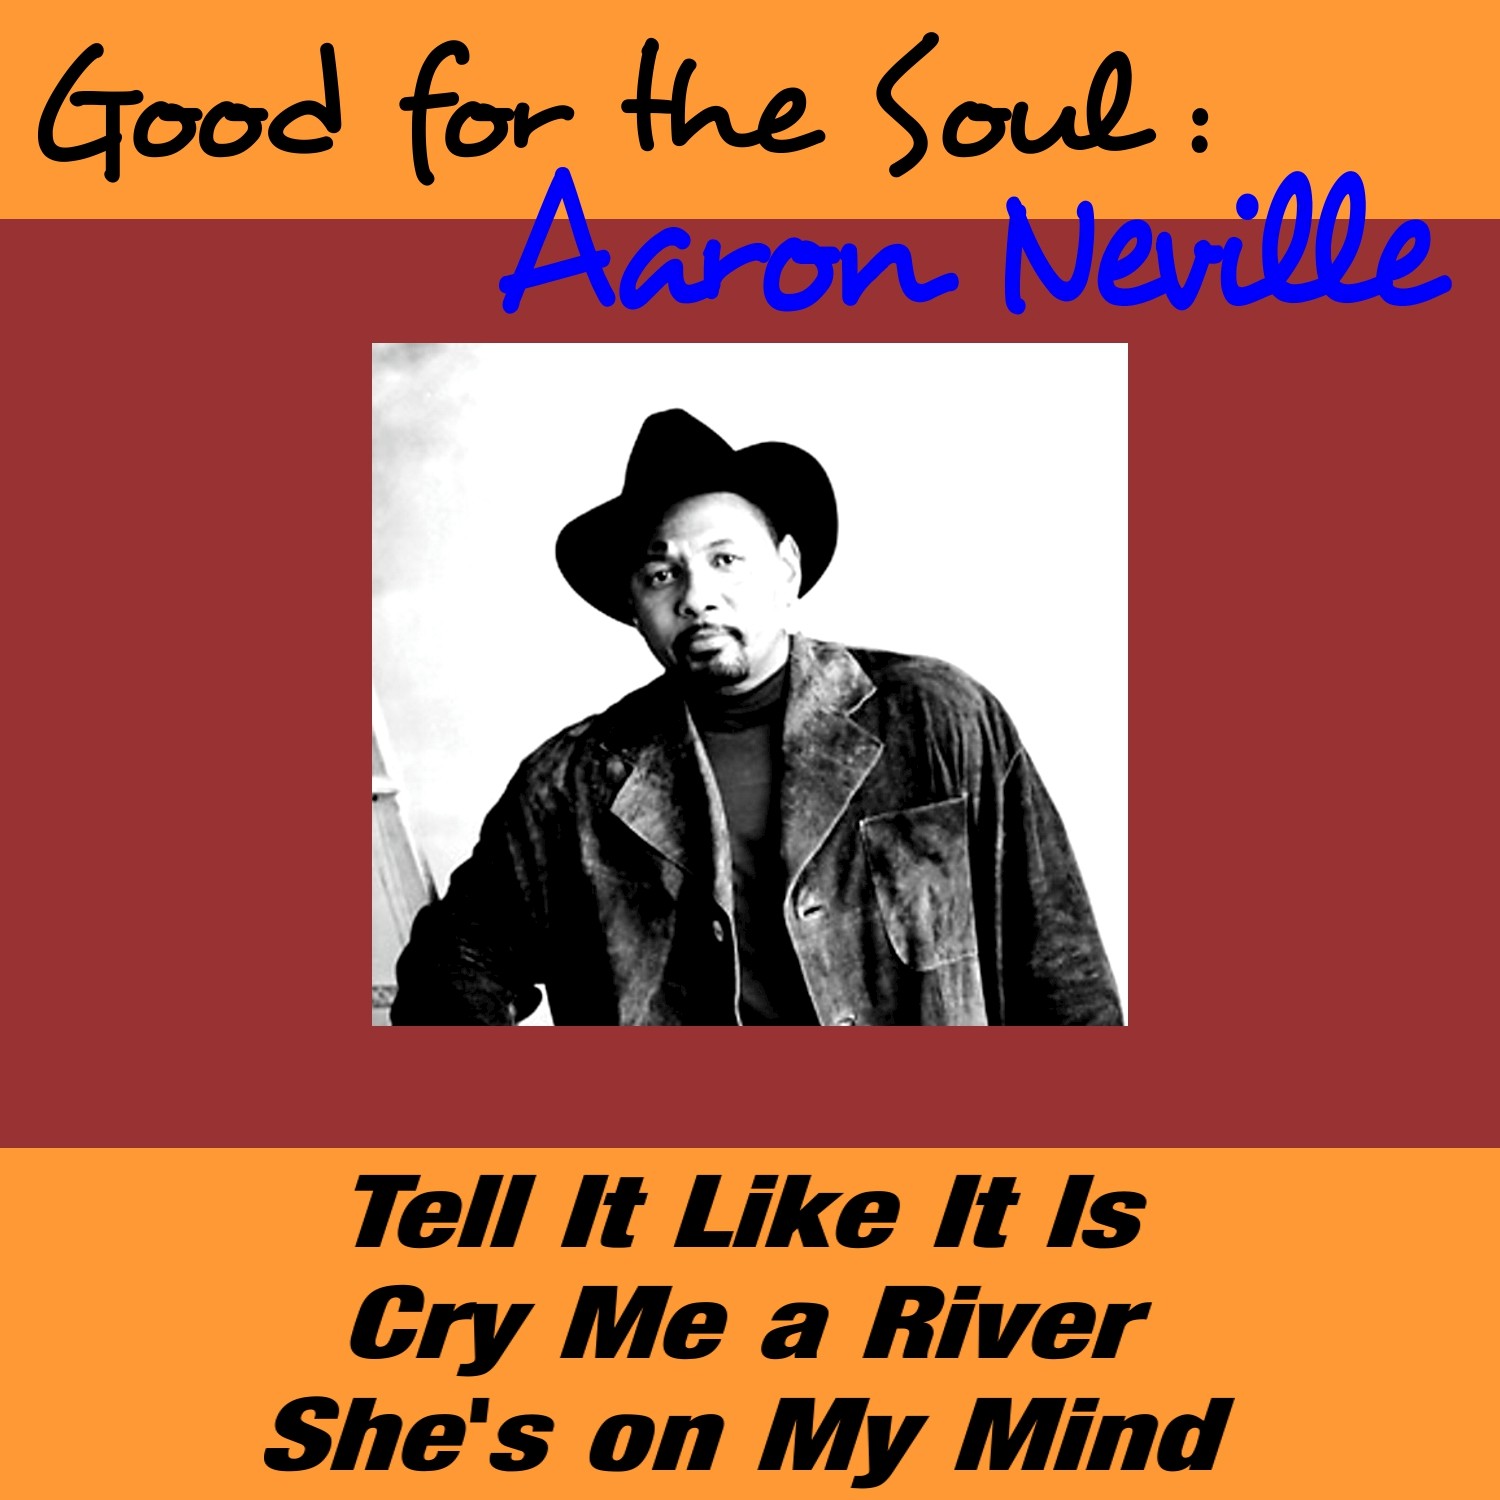 Good for the Soul: Aaron Neville